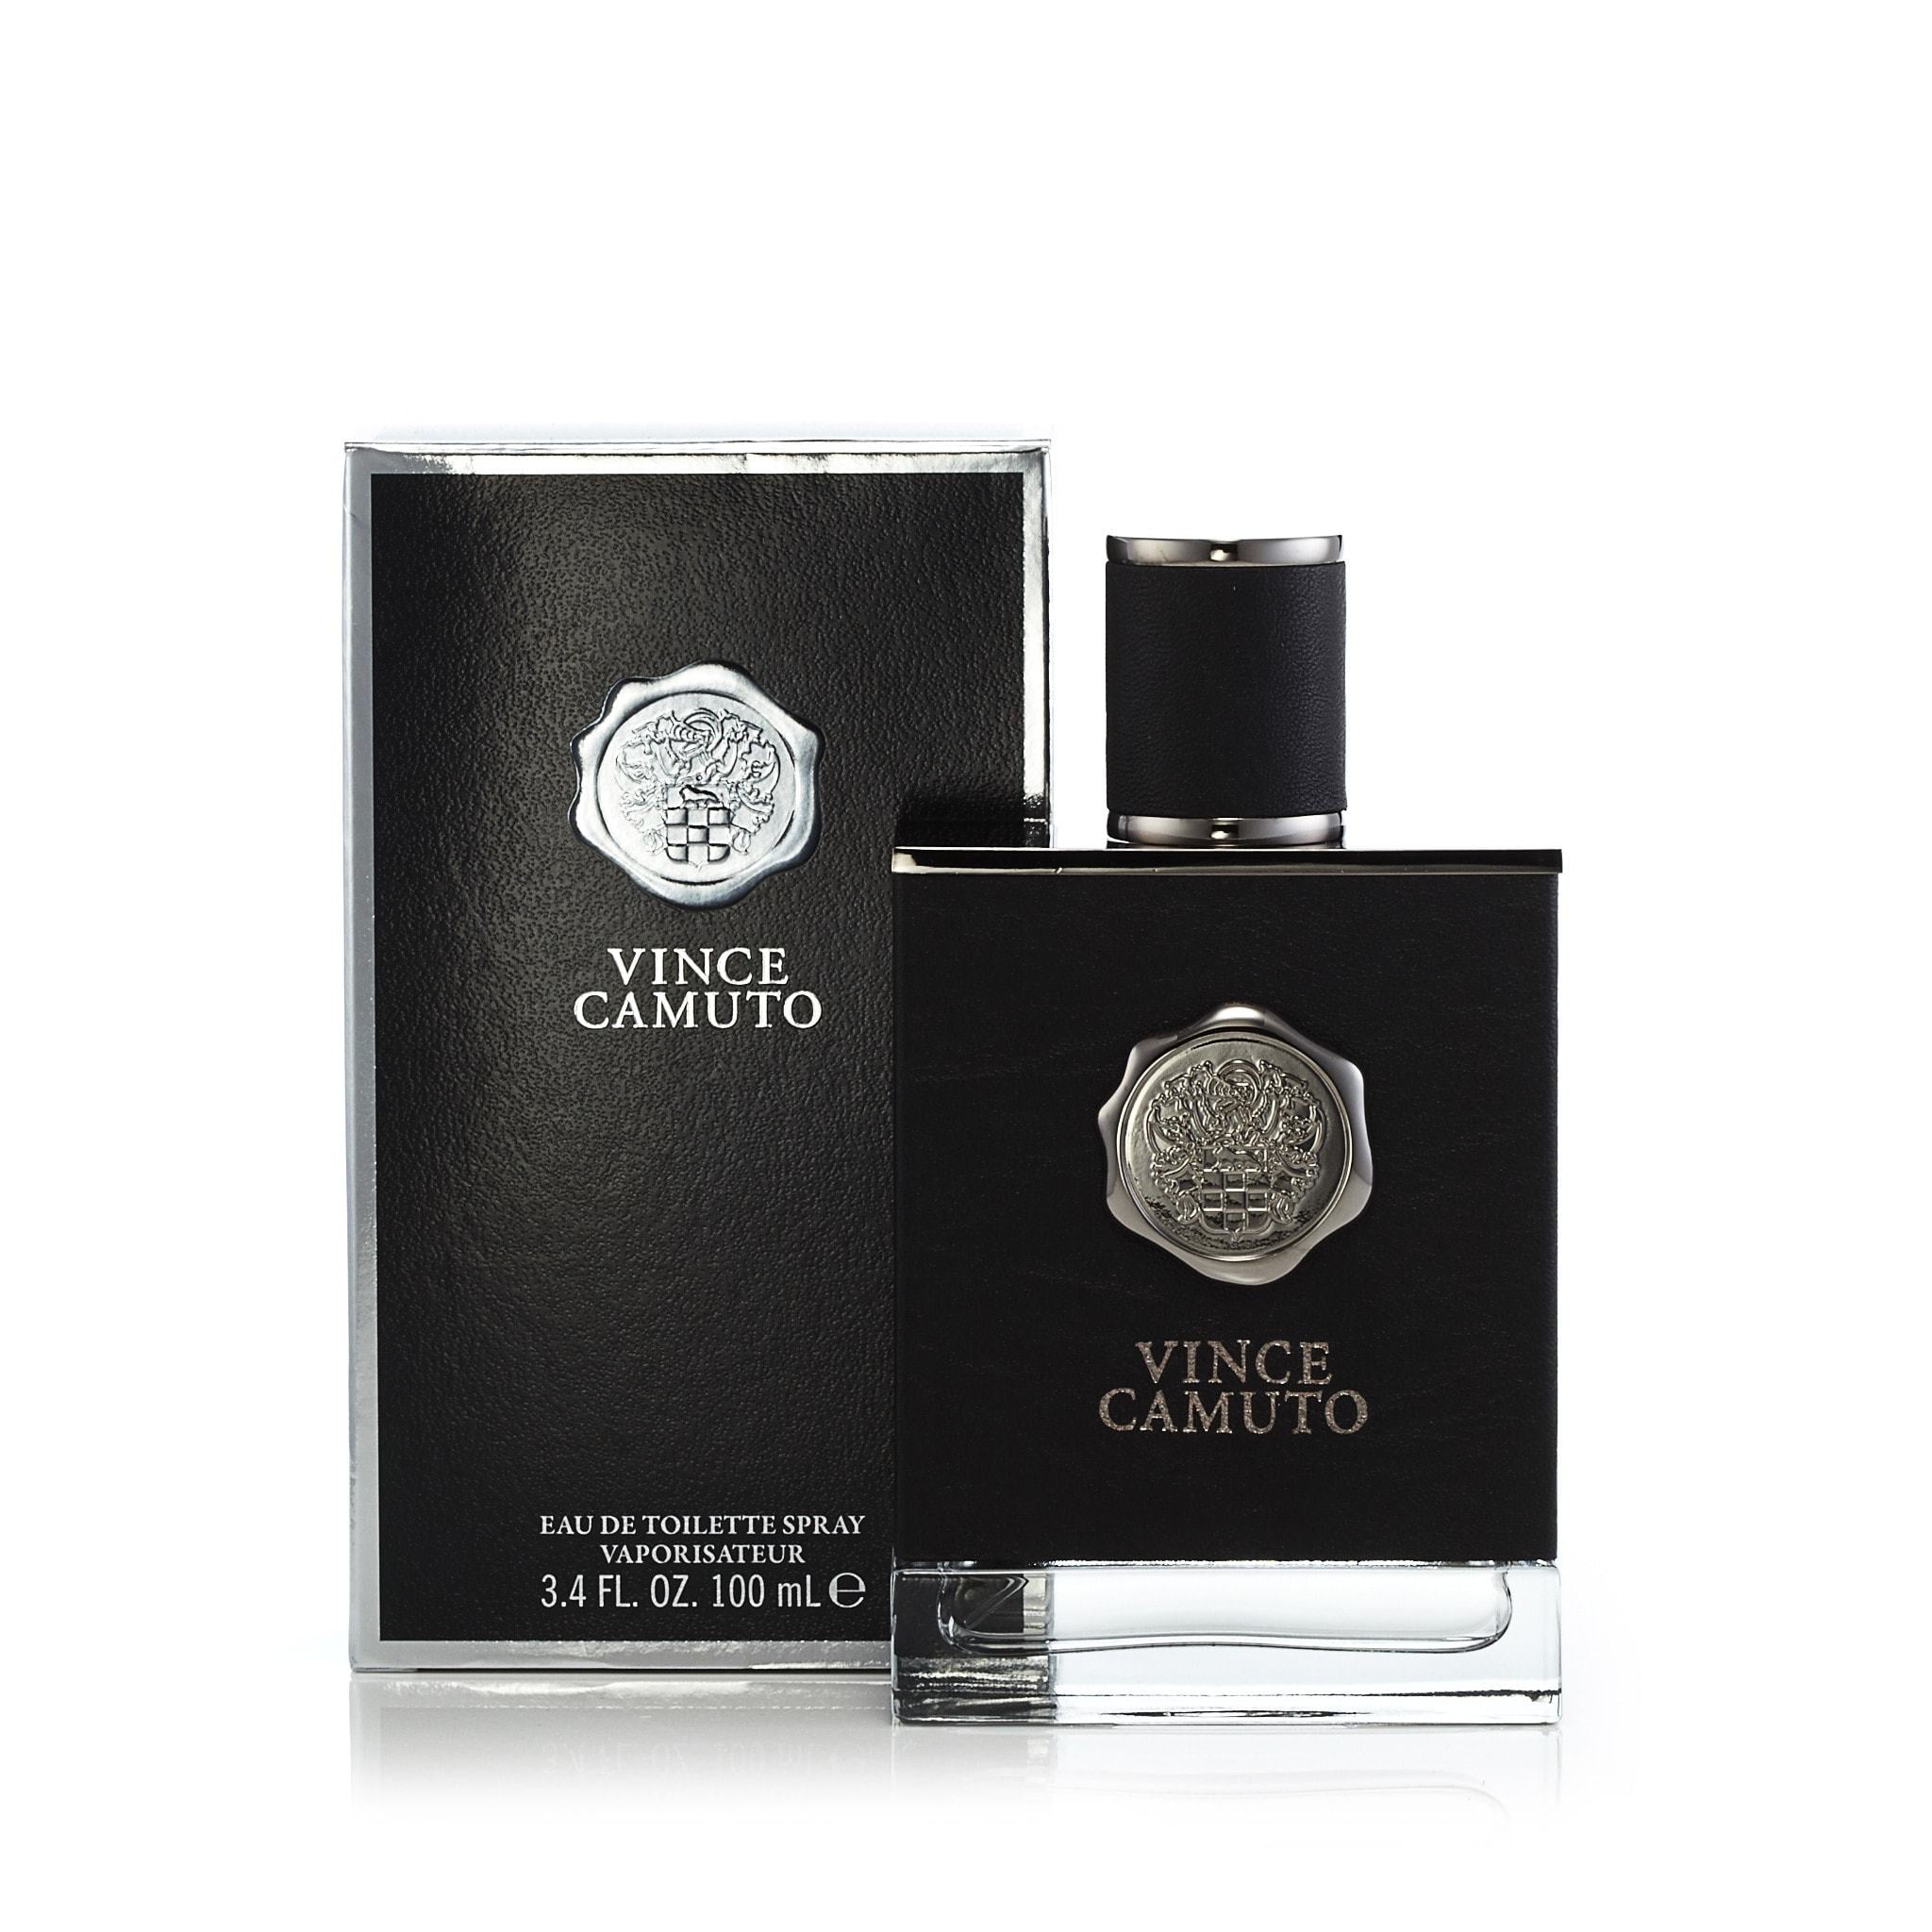 Vince Camuto Homme by Vince Camuto - Buy online